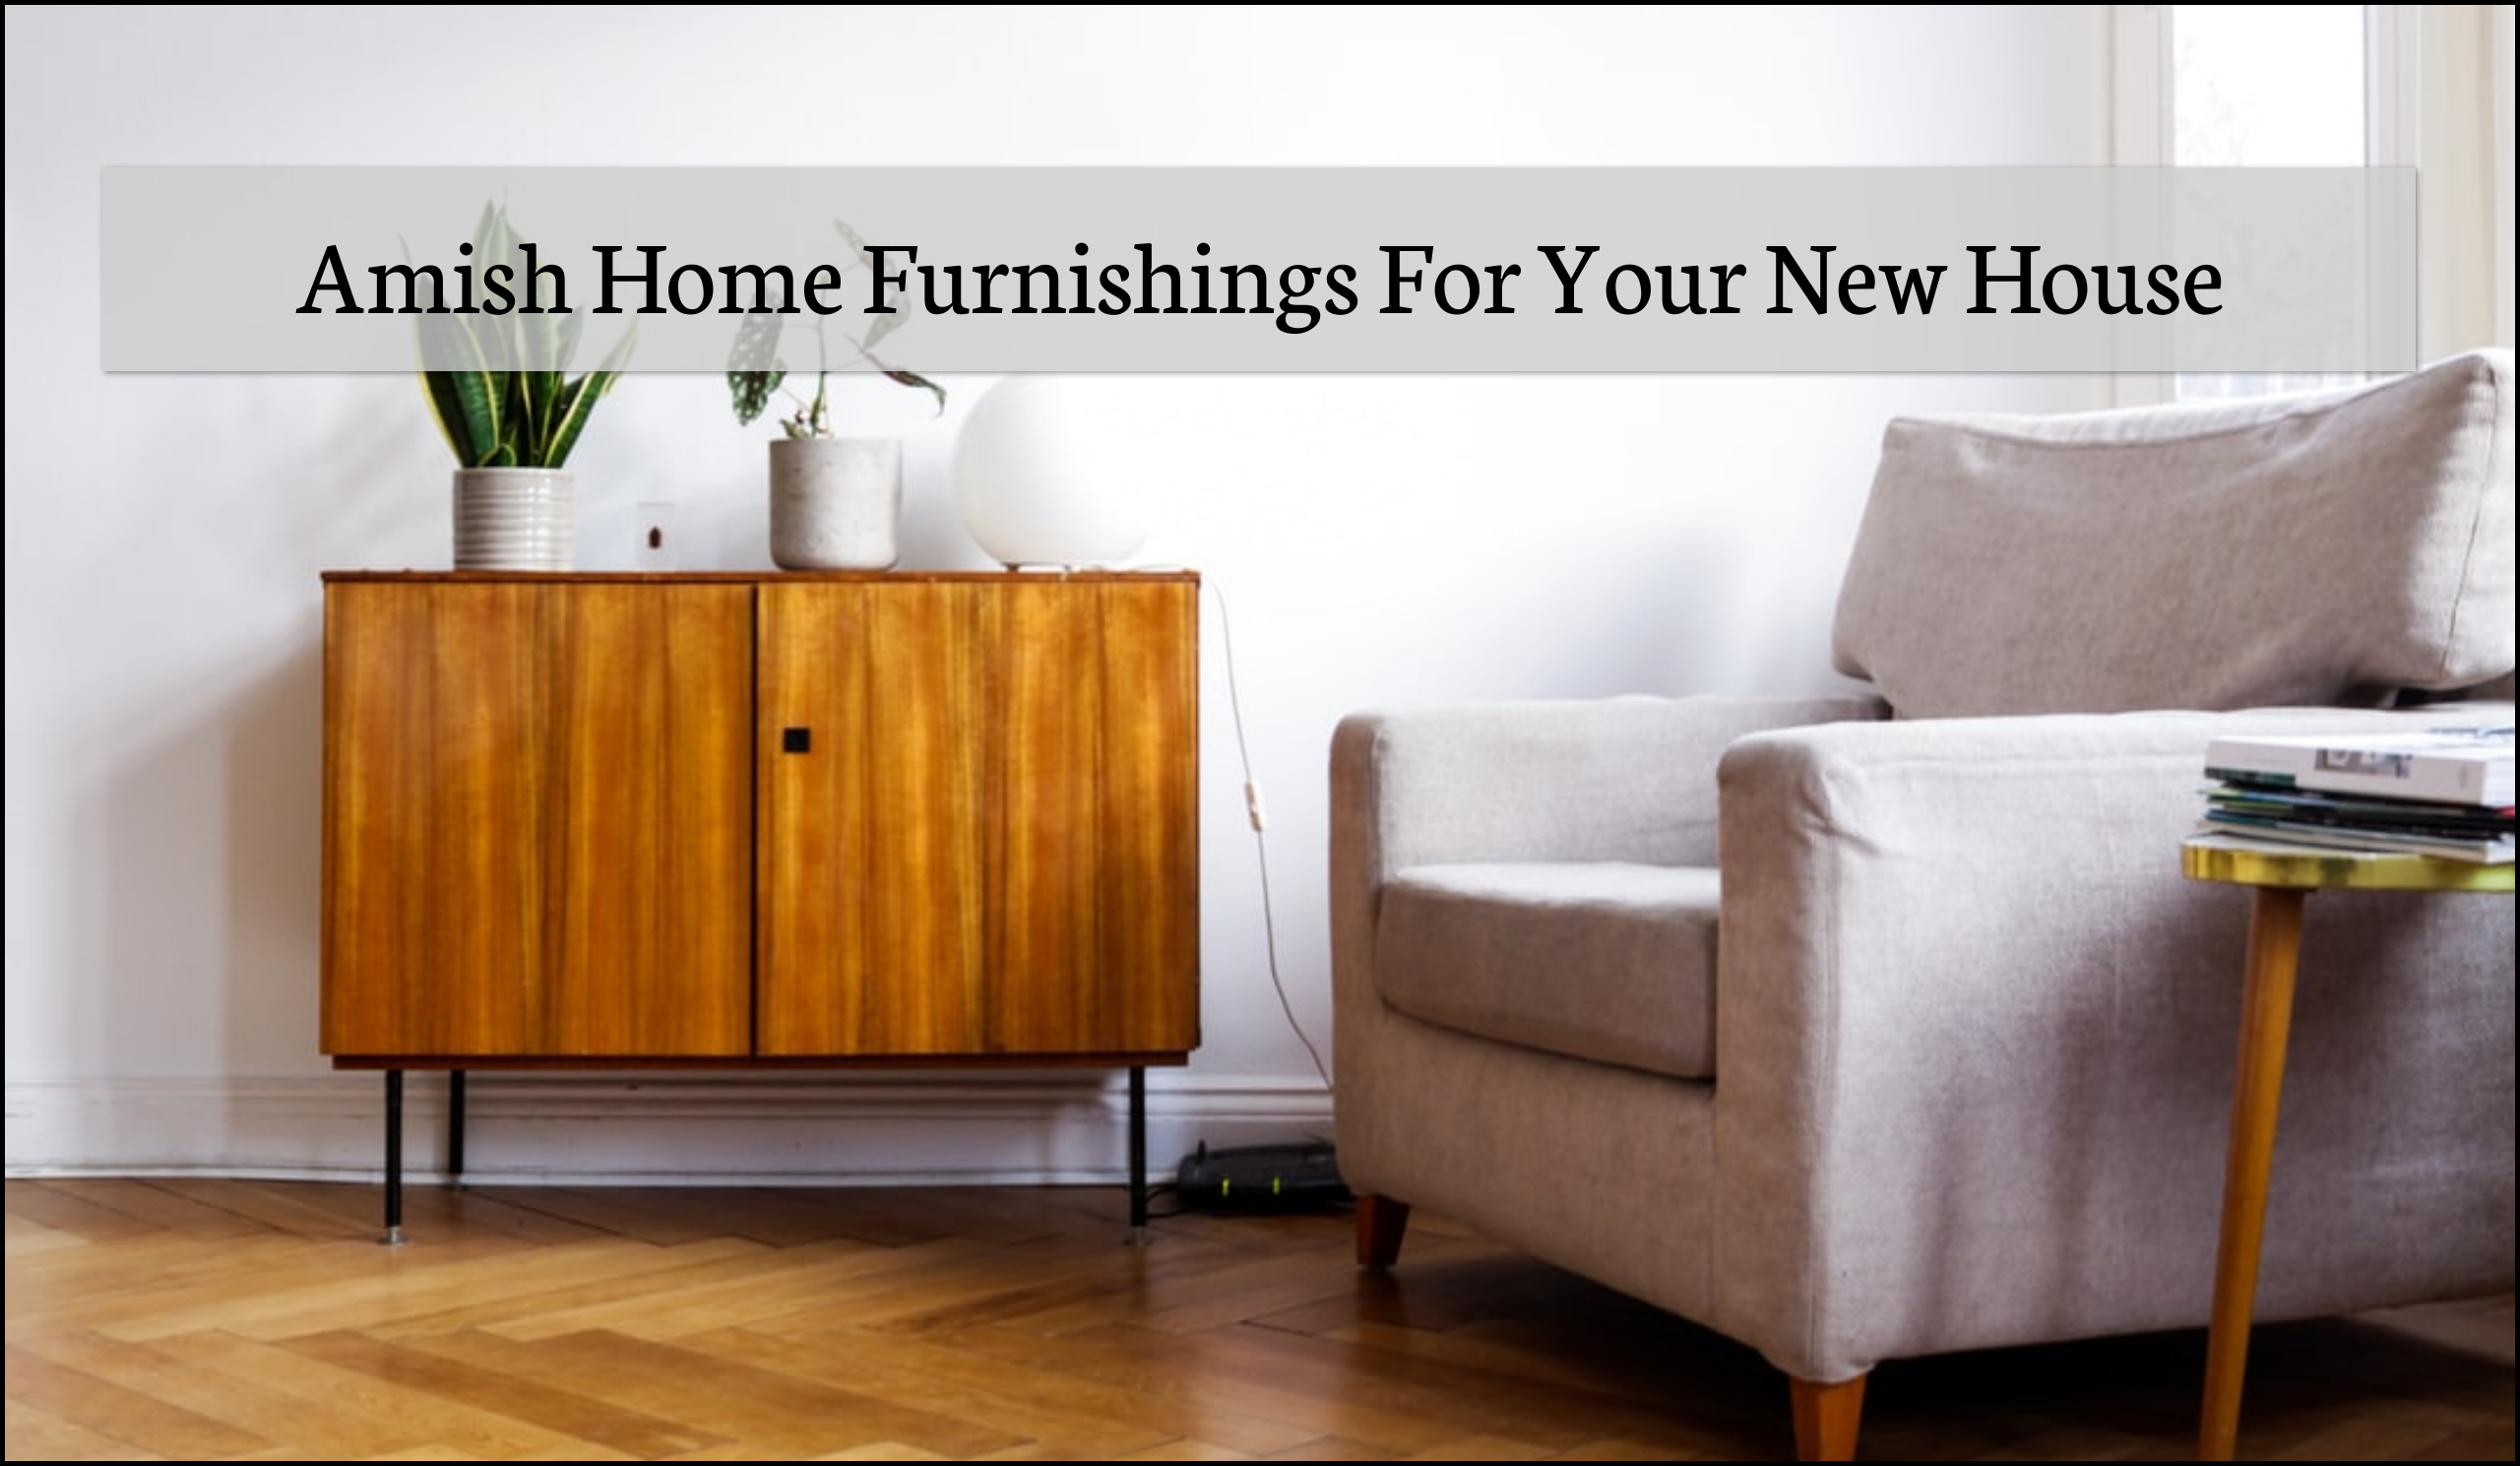 The Best Amish Home Furnishings For Your New House – Feb. 2022-Max-Quality